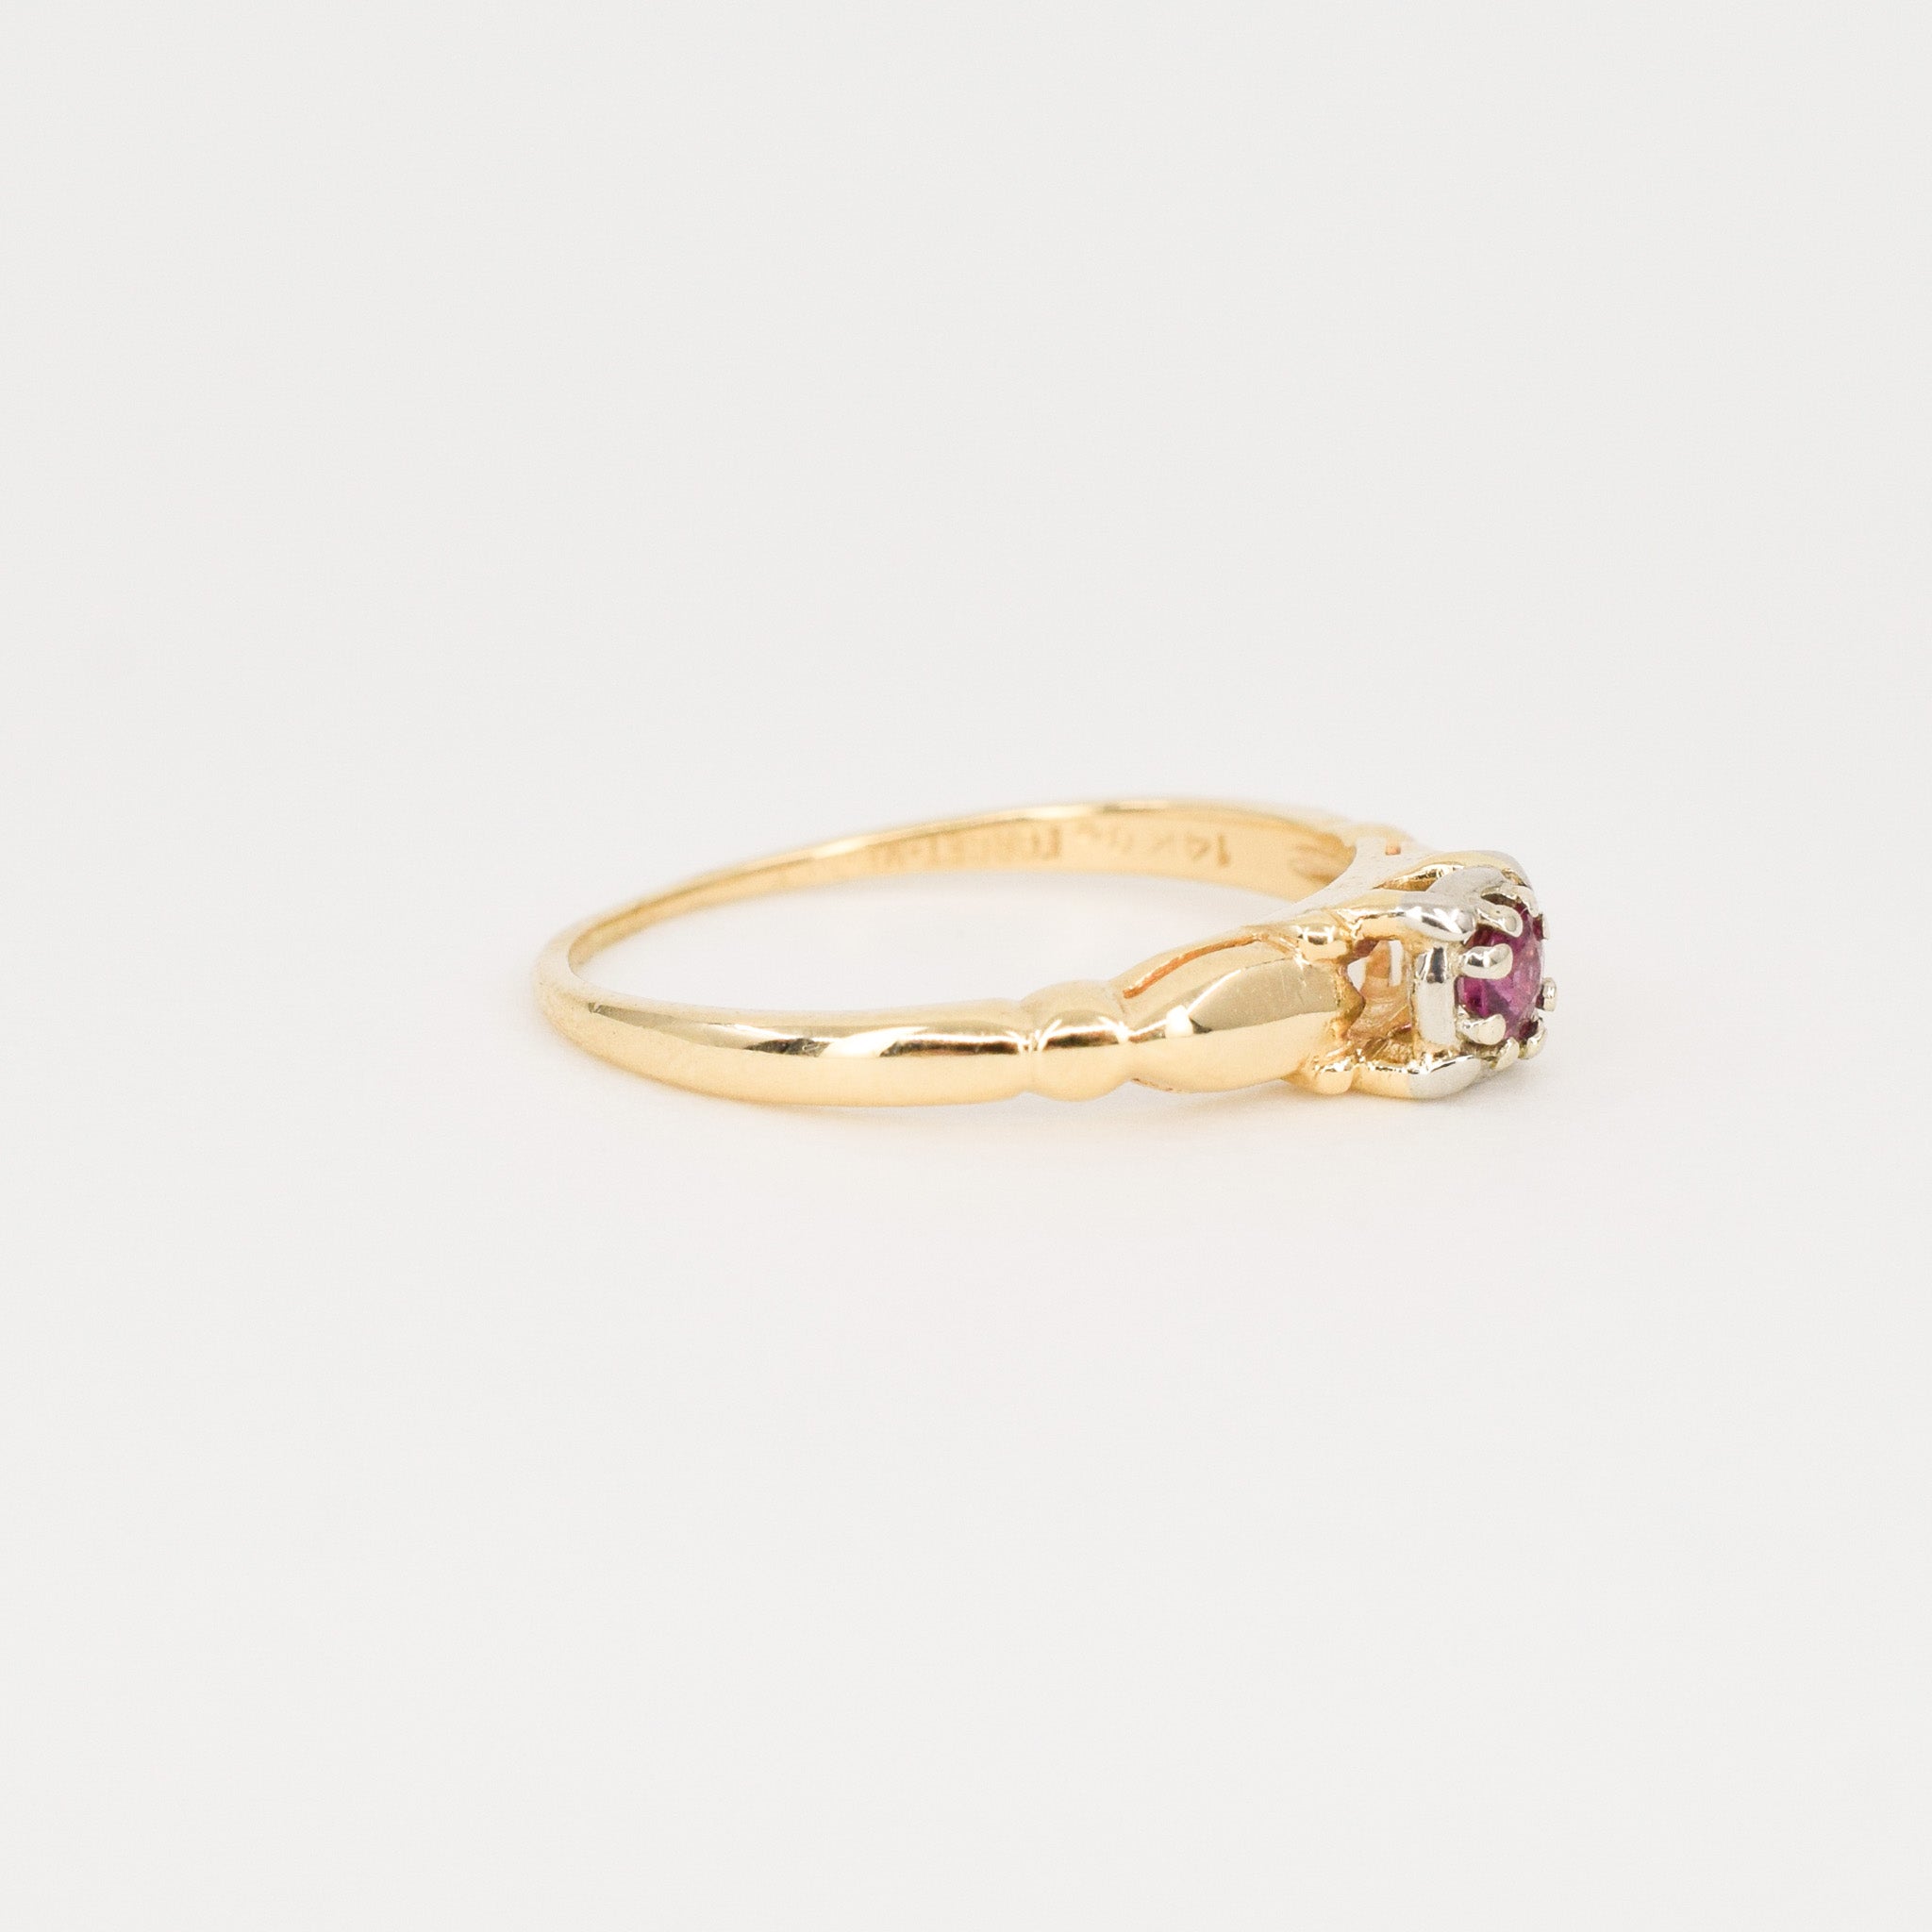 vintage dainty ruby ring, folklor vintage jewelry canada